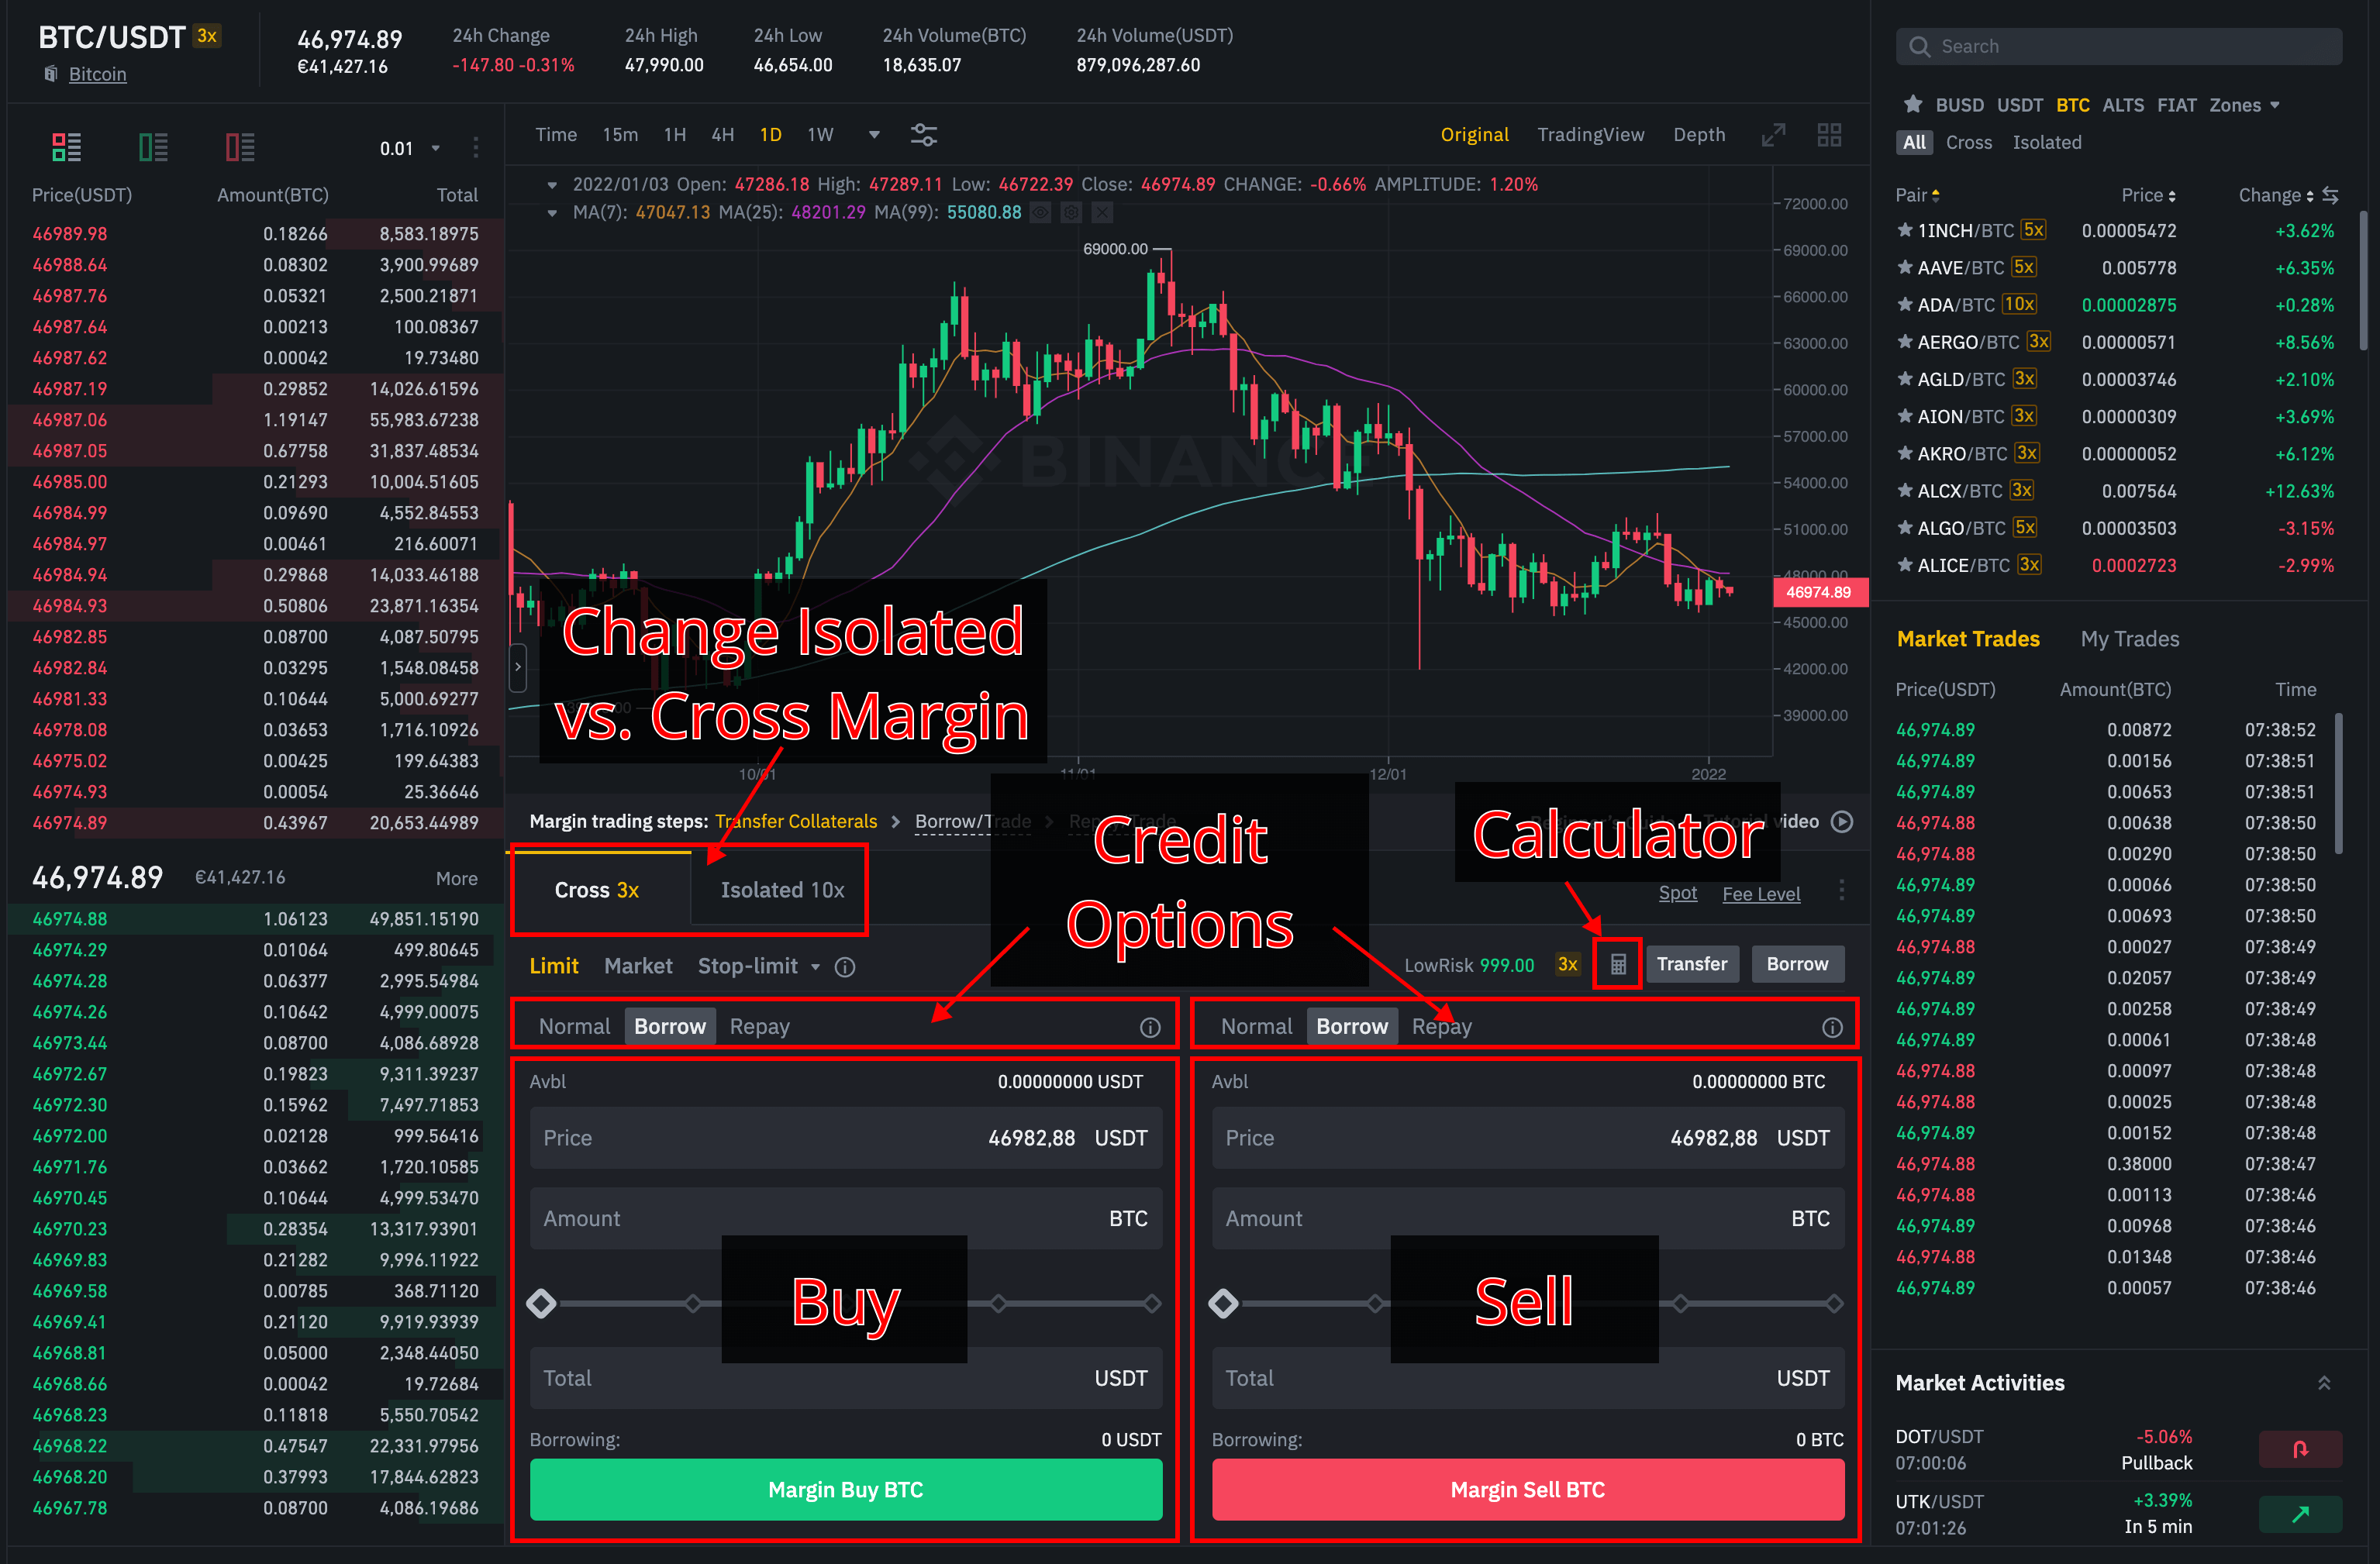 Margin trading view on Binance. The user can choose between 3x Cross Margin and 10x Isolated Margin. Above the buy and sell dialog, one has the option to choose how the trade will be executed in terms of margin: Normal, Borrow and Repay. In addition, the view provides a calculator that allows you to pre-calculate scenarios.